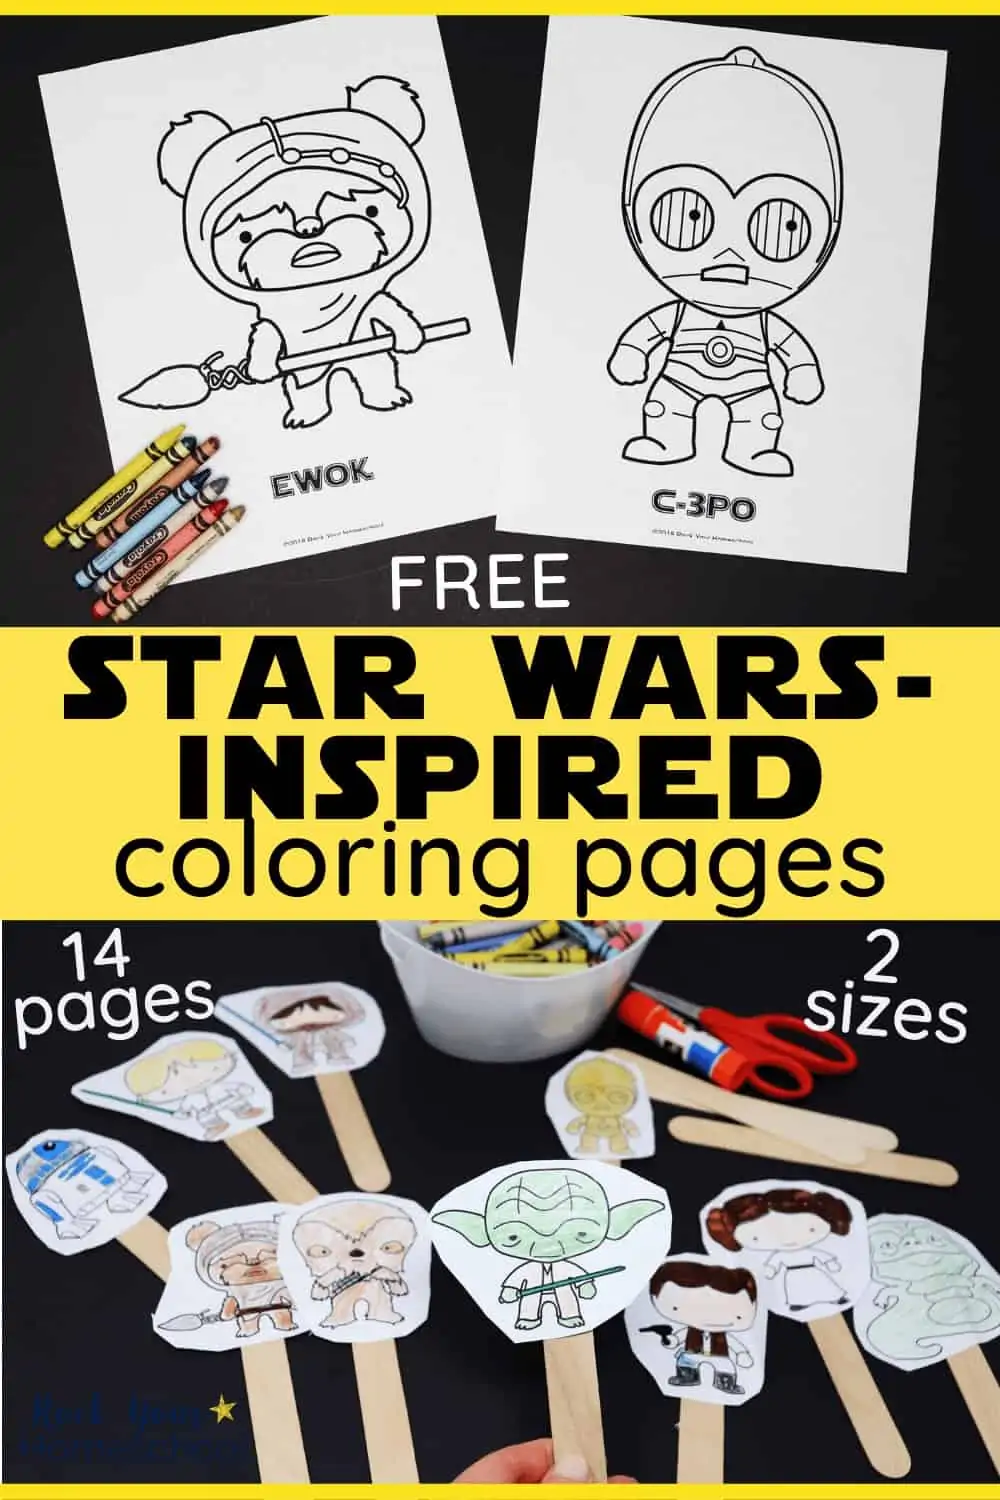 Free Star Wars-Inspired Coloring Pages for Kids